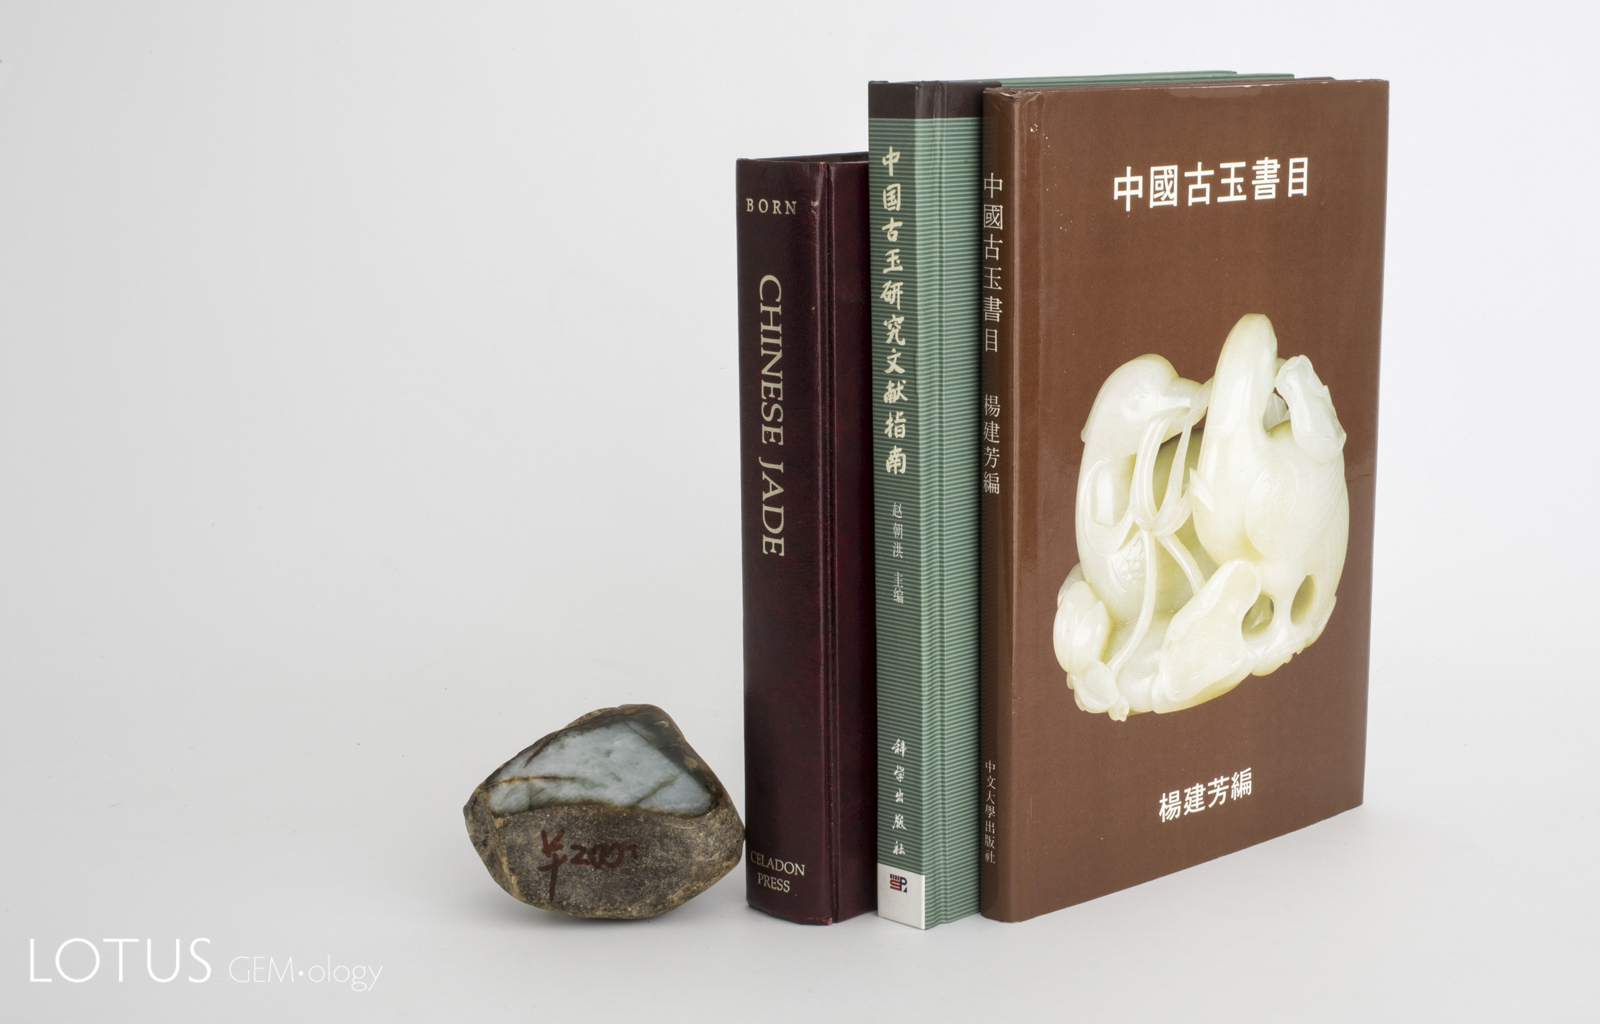 For the collector, bibliographies are essential references. From left to right: Born, Zhou and Yang. At left is a sliced piece of rough Burmese jadeite.